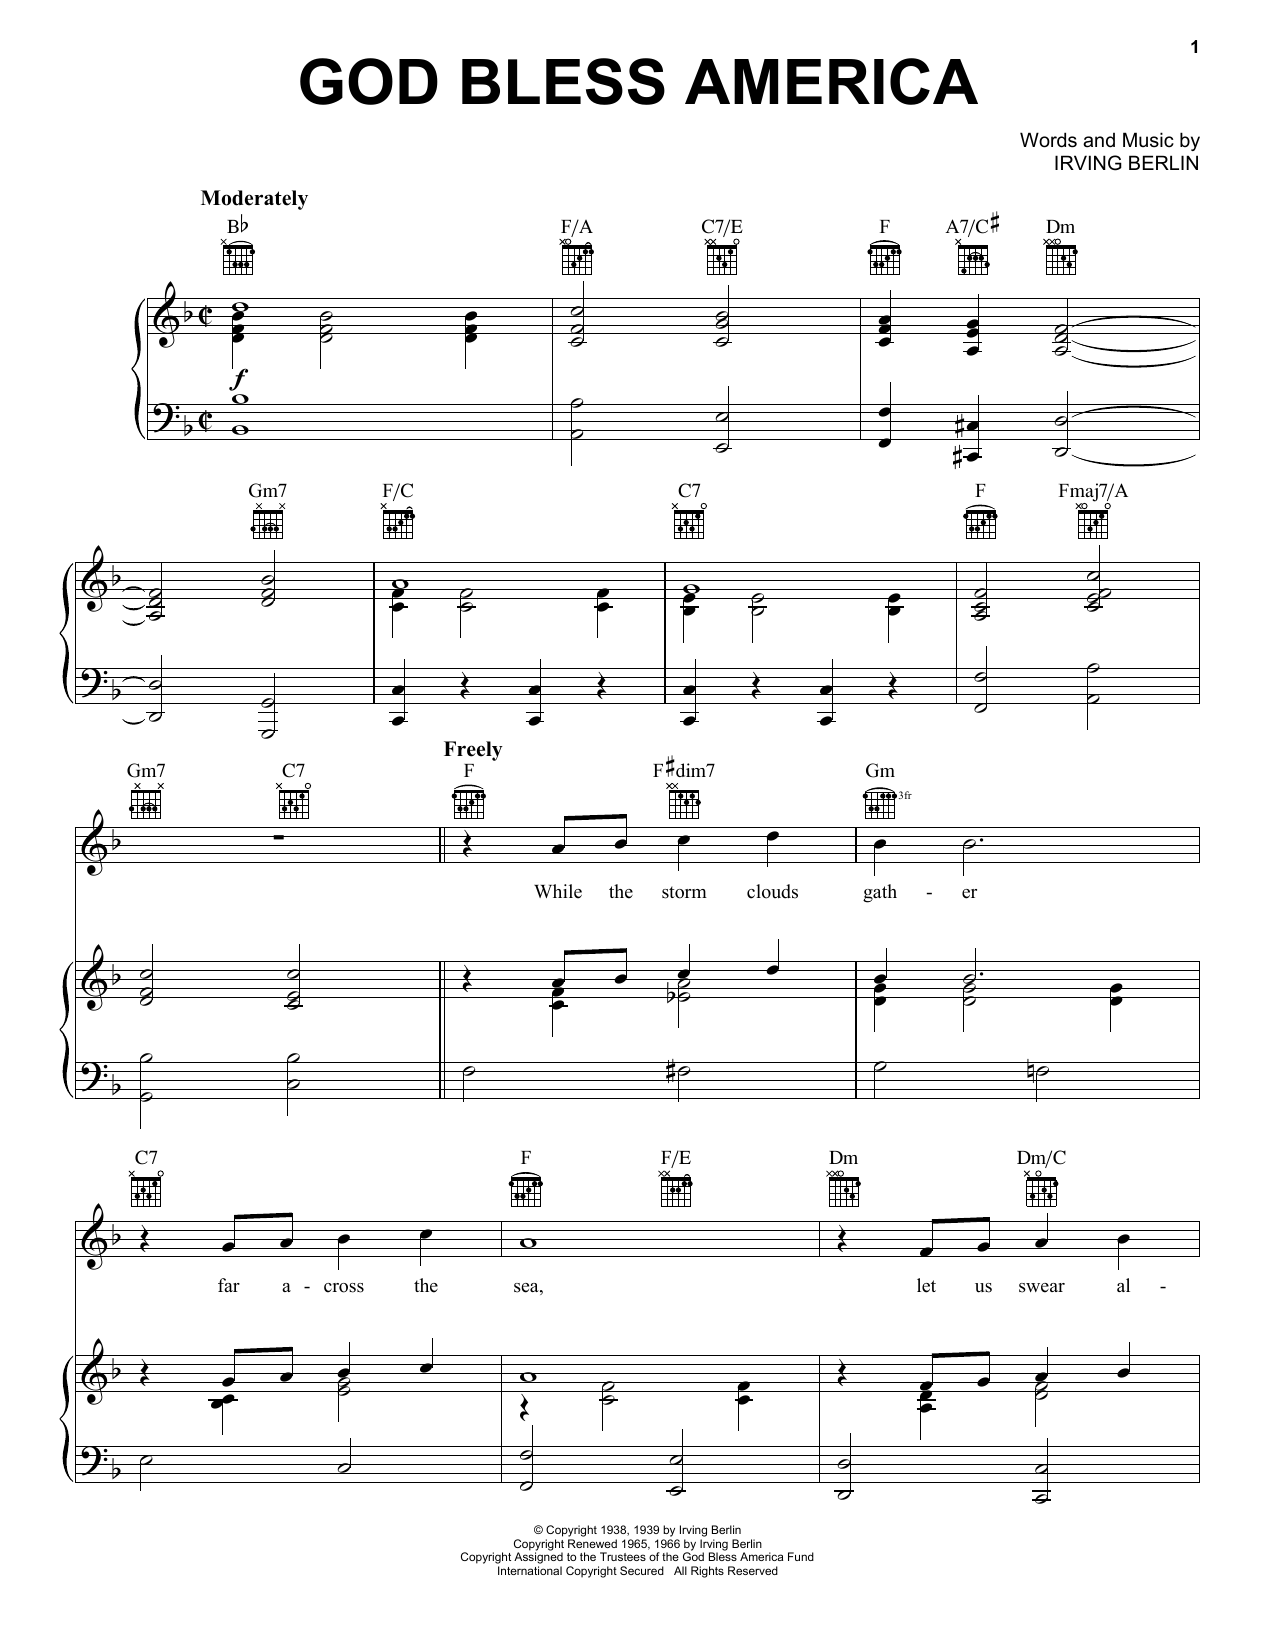 Irving Berlin God Bless America sheet music notes and chords. Download Printable PDF.